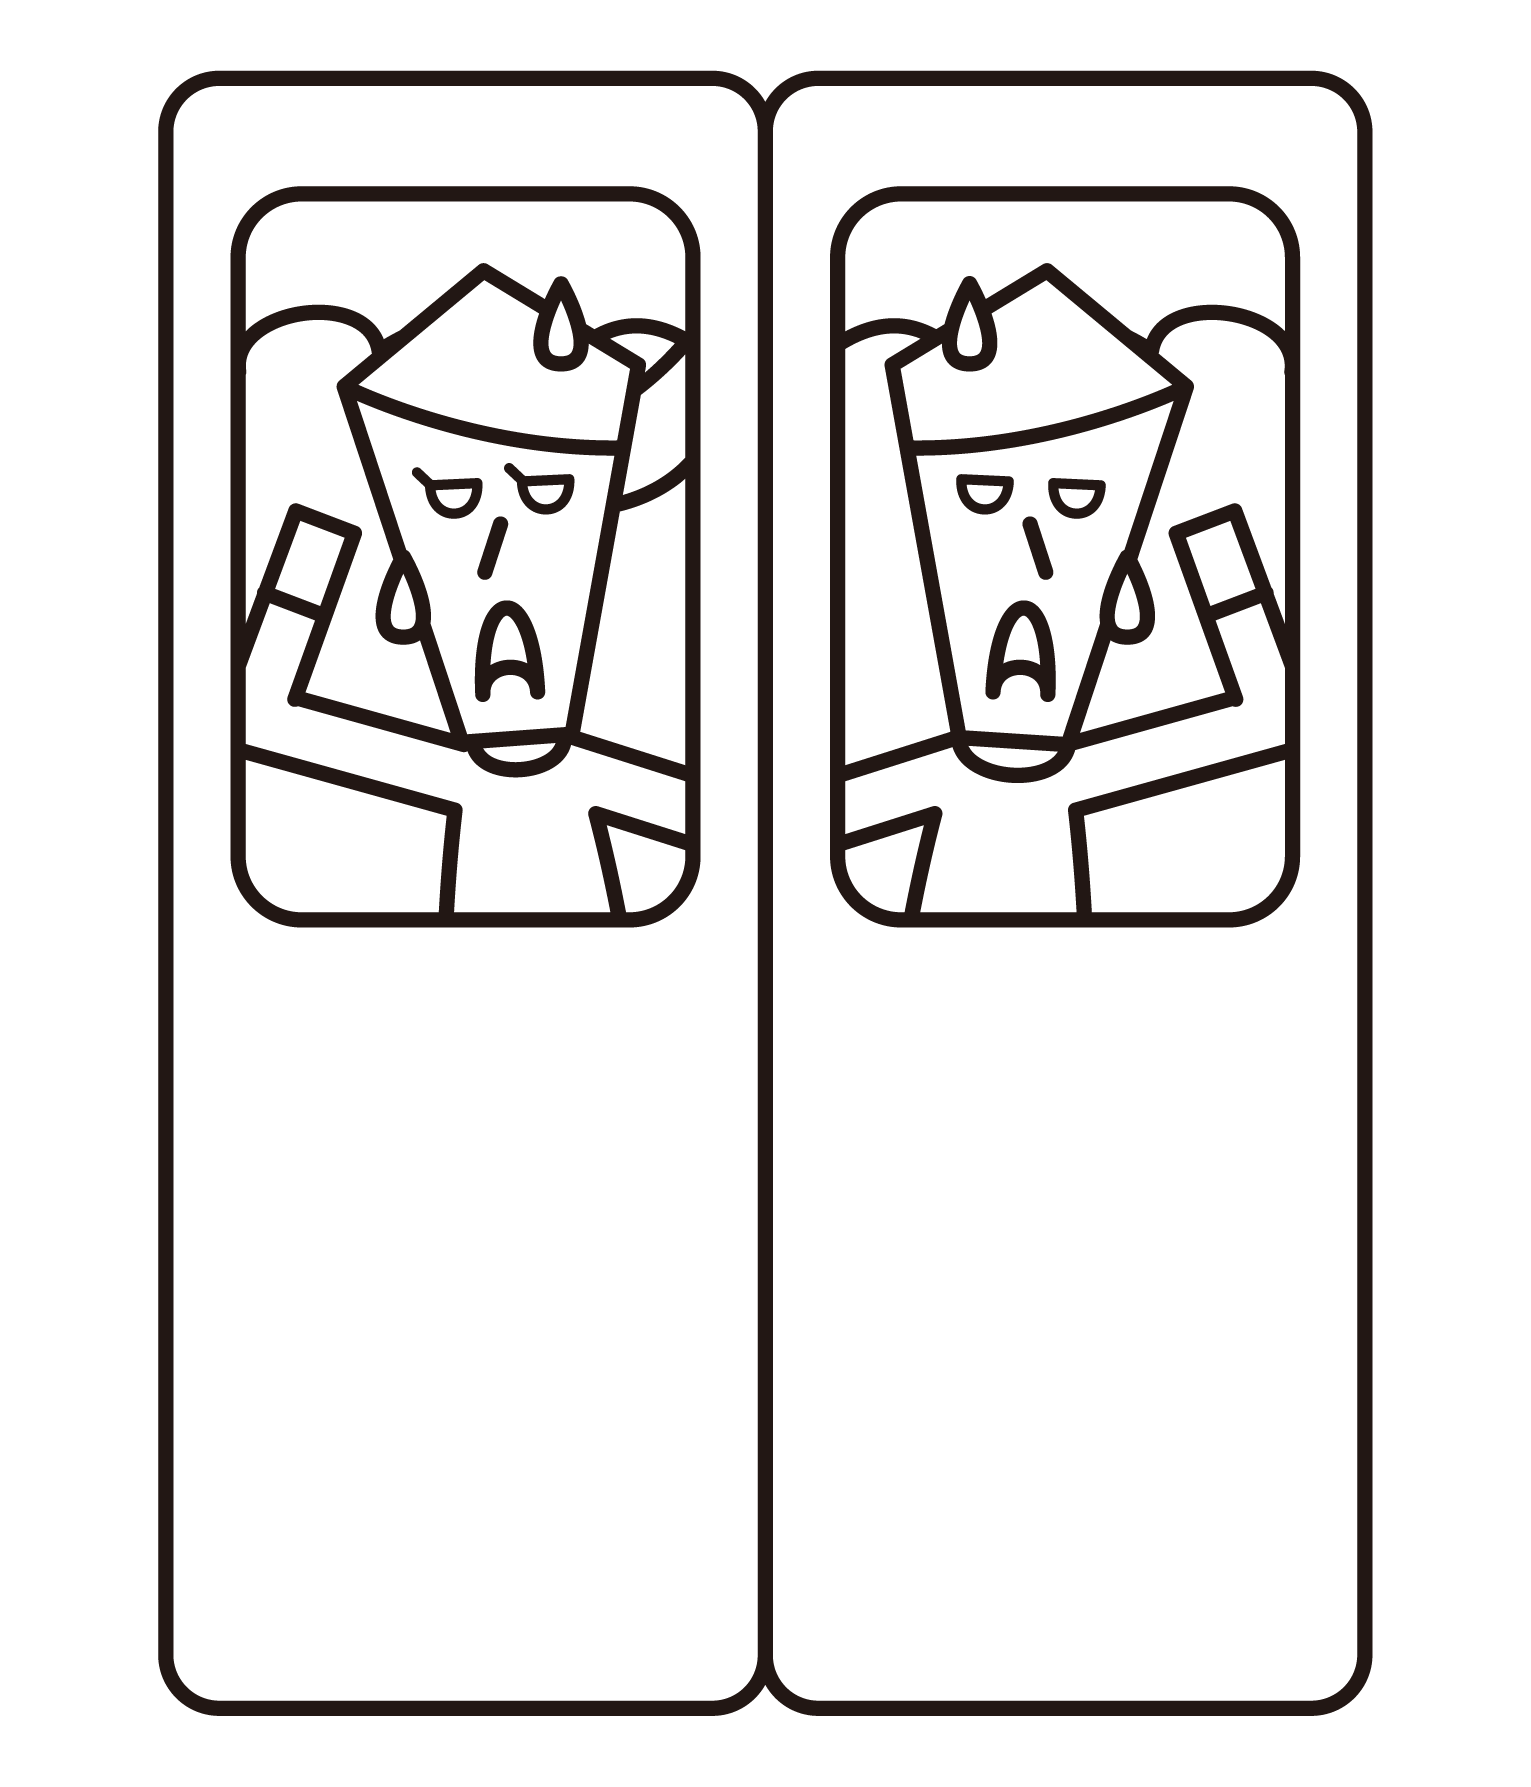 Illustration of a person riding a crowded train